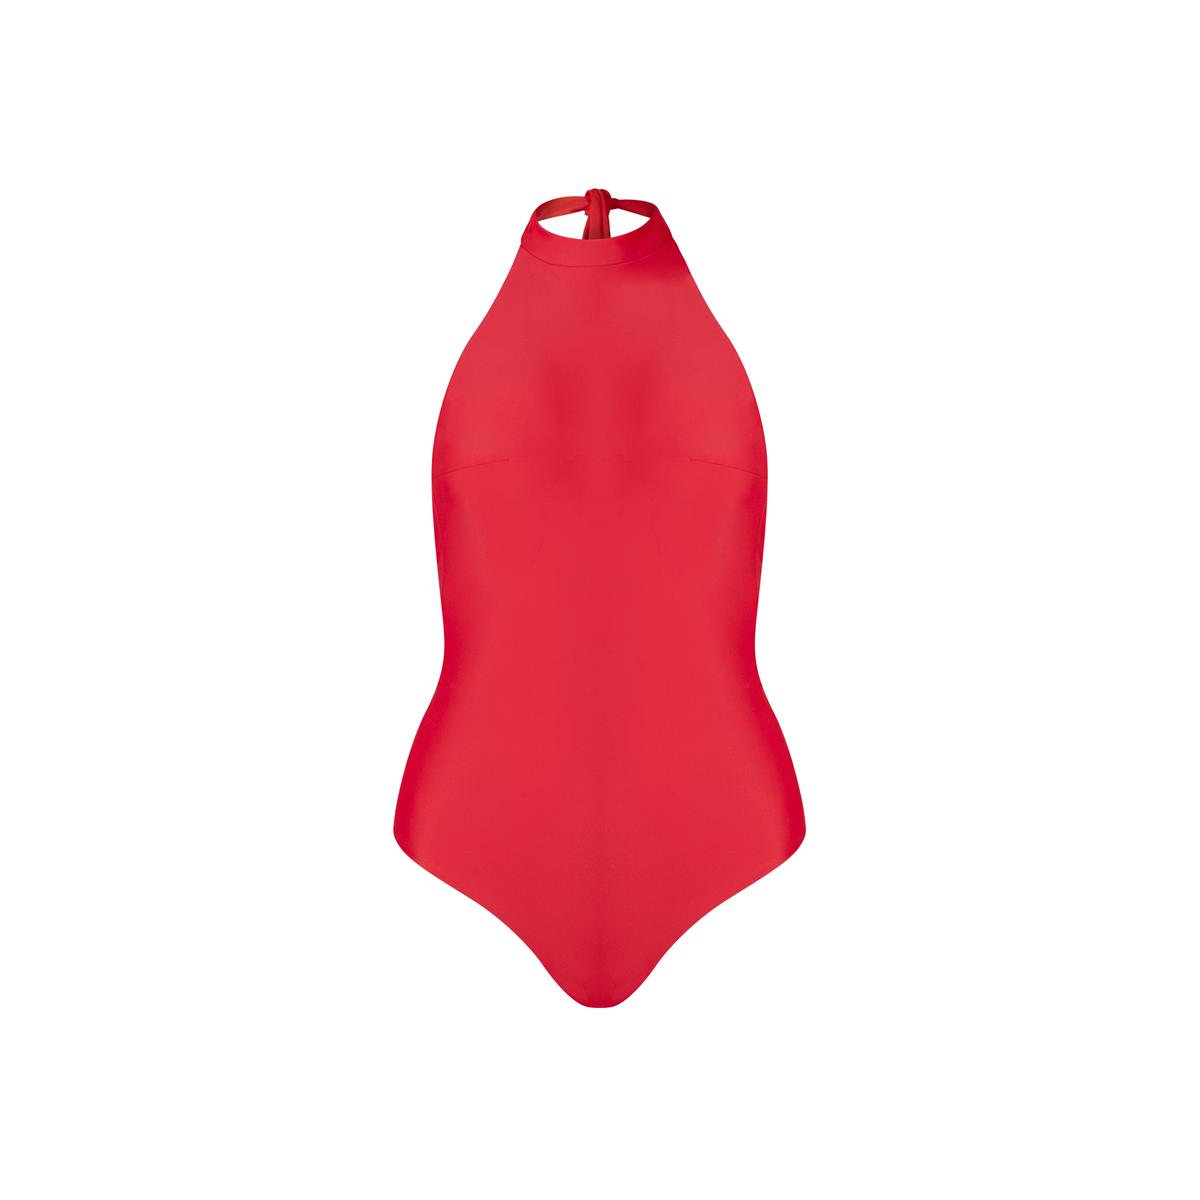 MARGARET AND HERMIONE_SS18_Swimsuit No.4_red_EUR 157,00